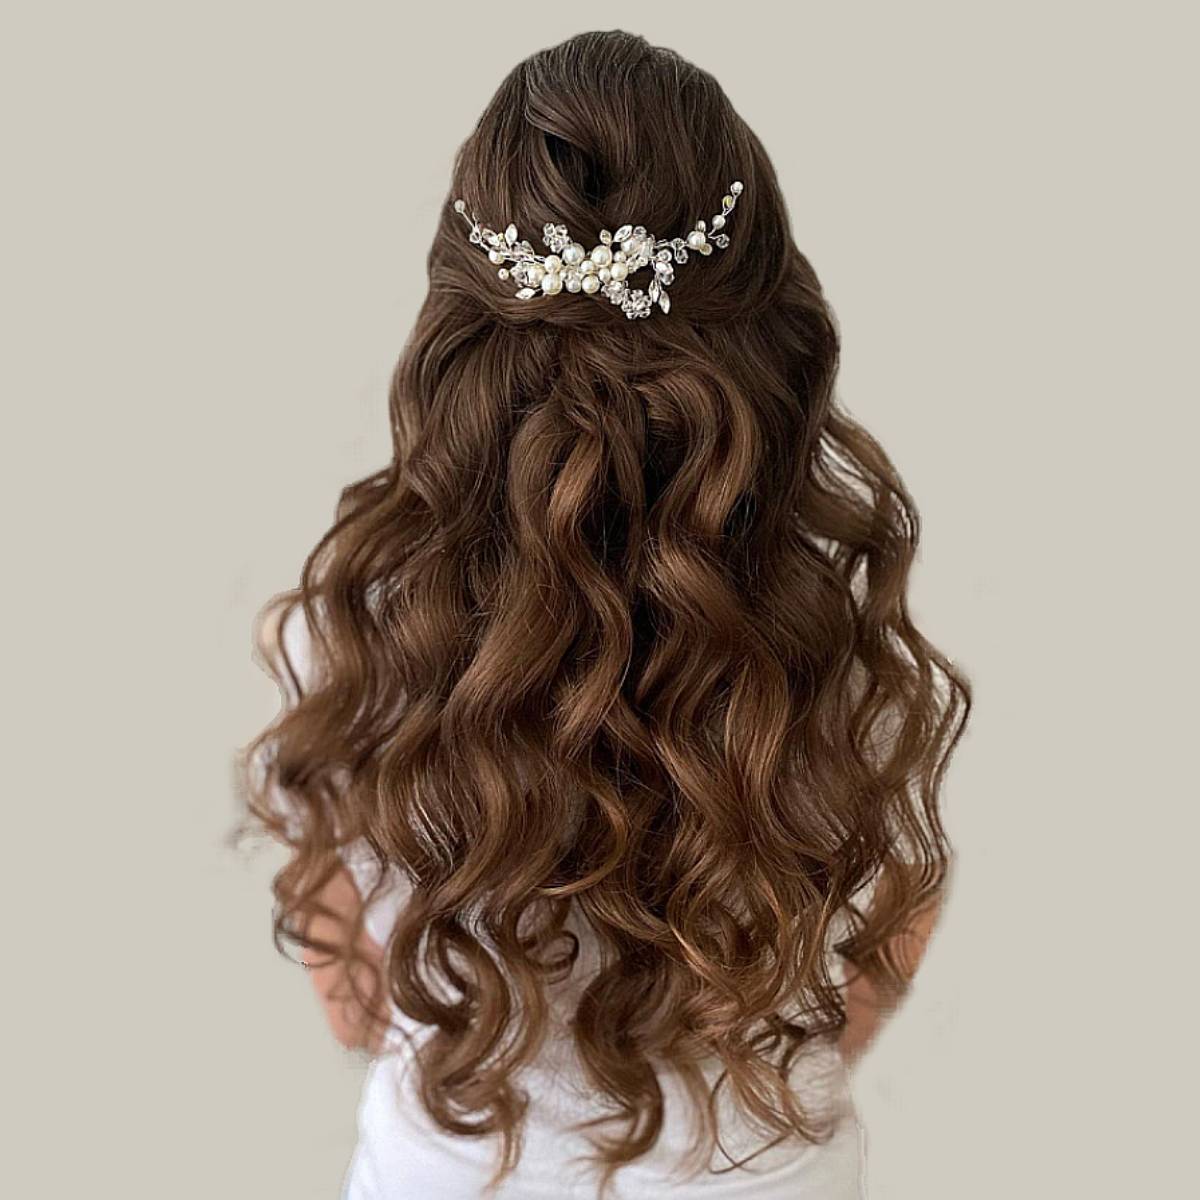 Princess Hairstyles The 27 Most Charming Ideas